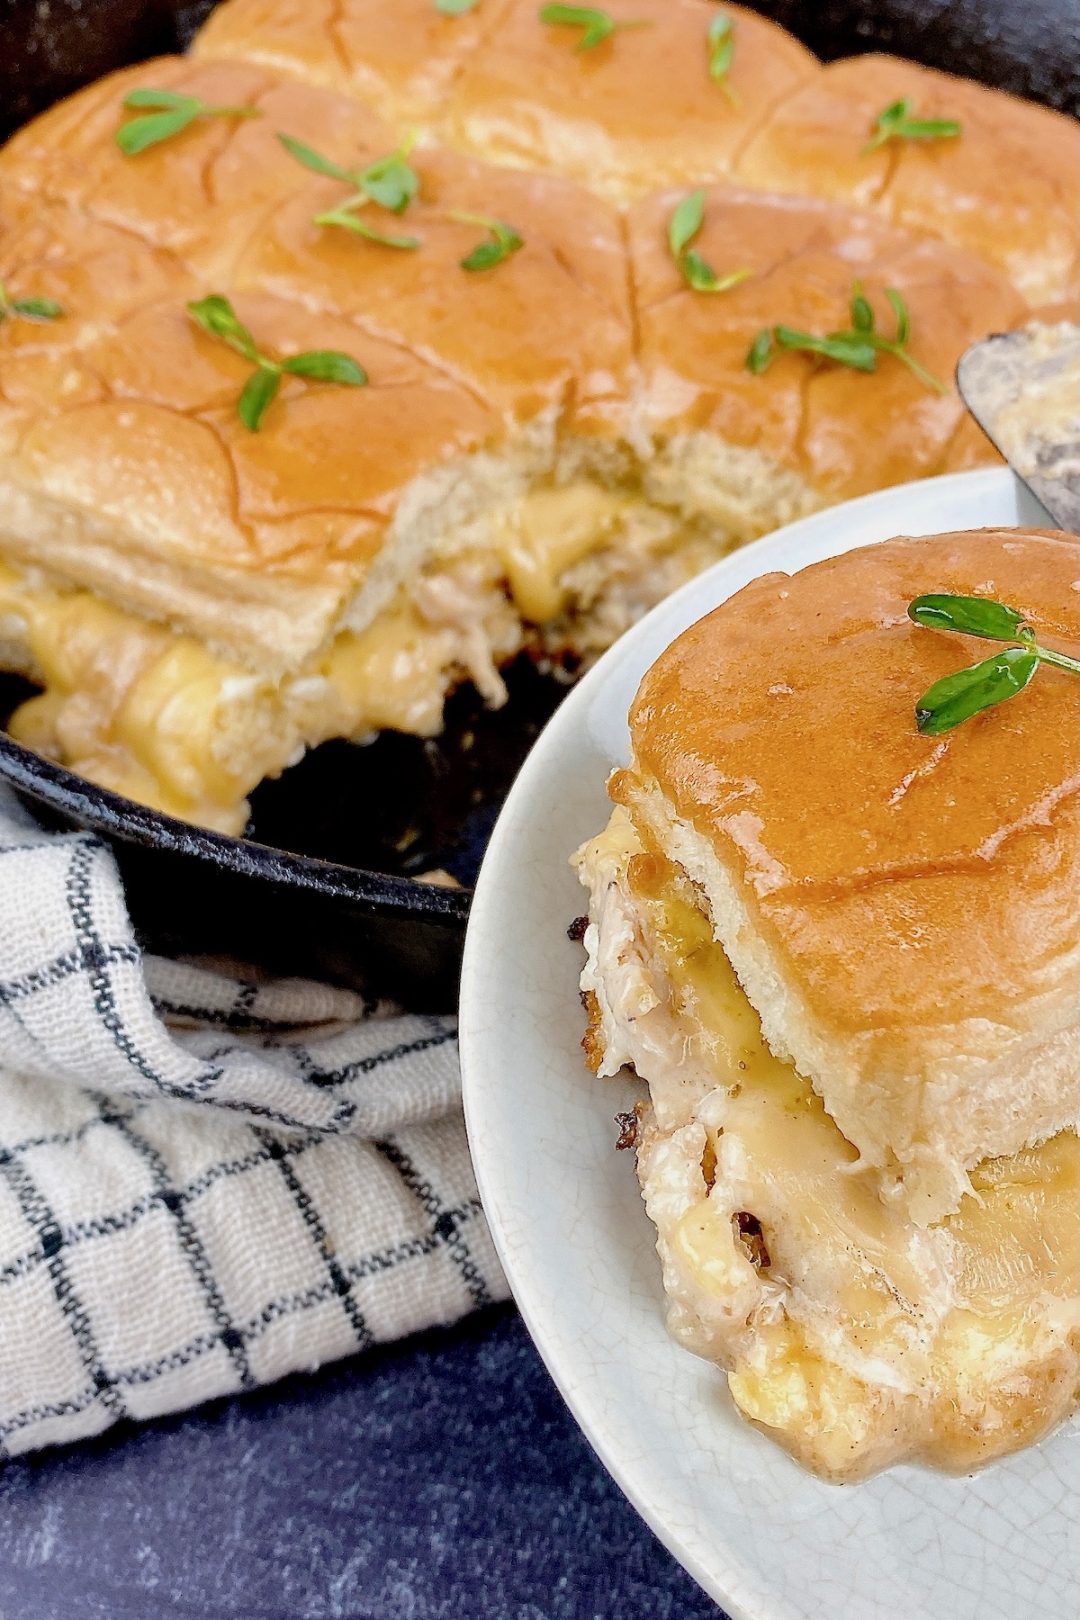 Ad Easy Cheesy Roasted Garlic Chicken Skillet Sliders – featured image